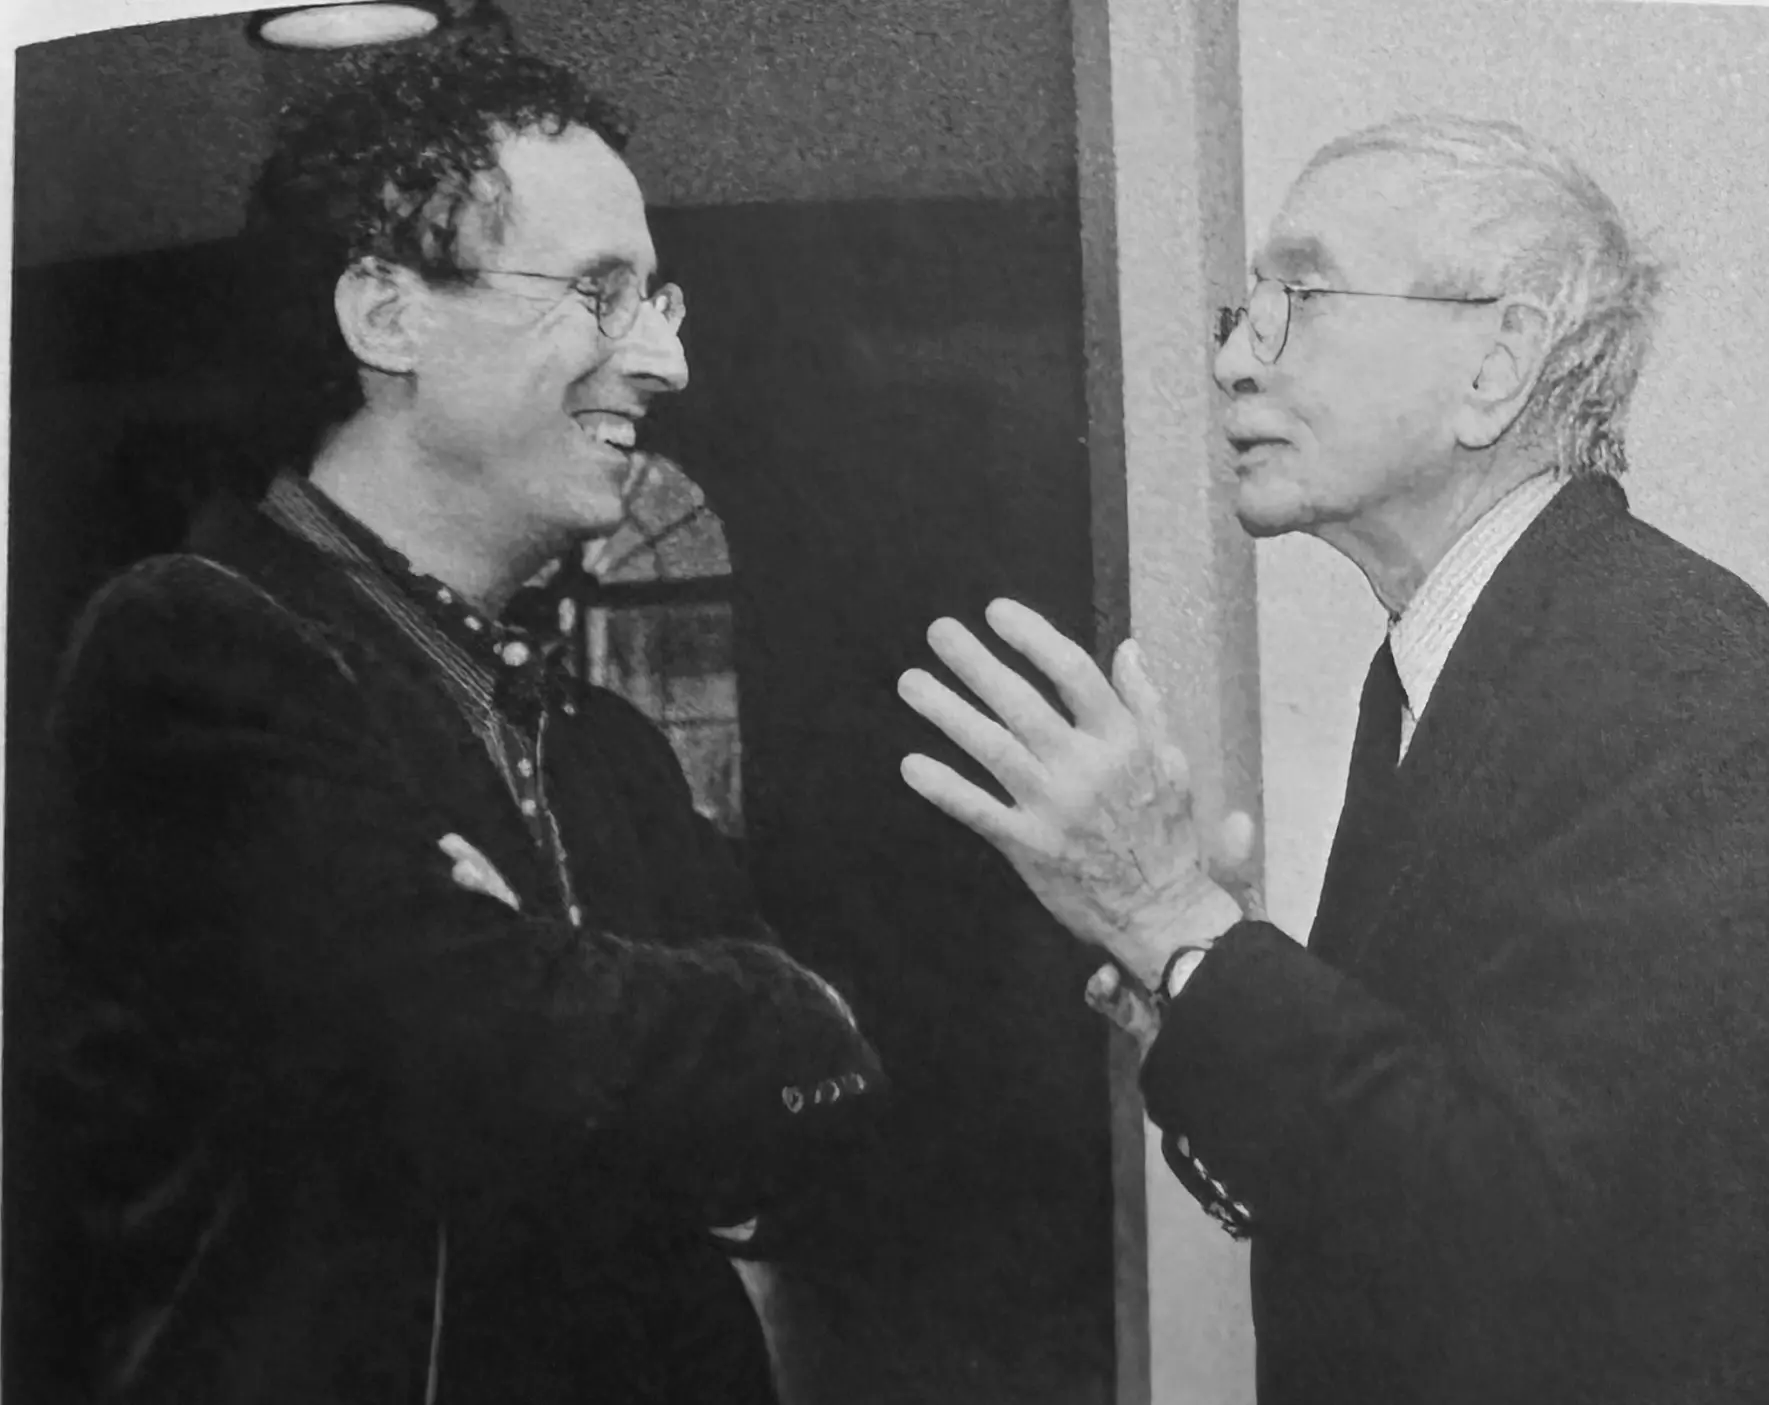 A black and white photograph of two men in conversation. On the left, Tony Kushner laughs as Edward Albee gestures with his hands.